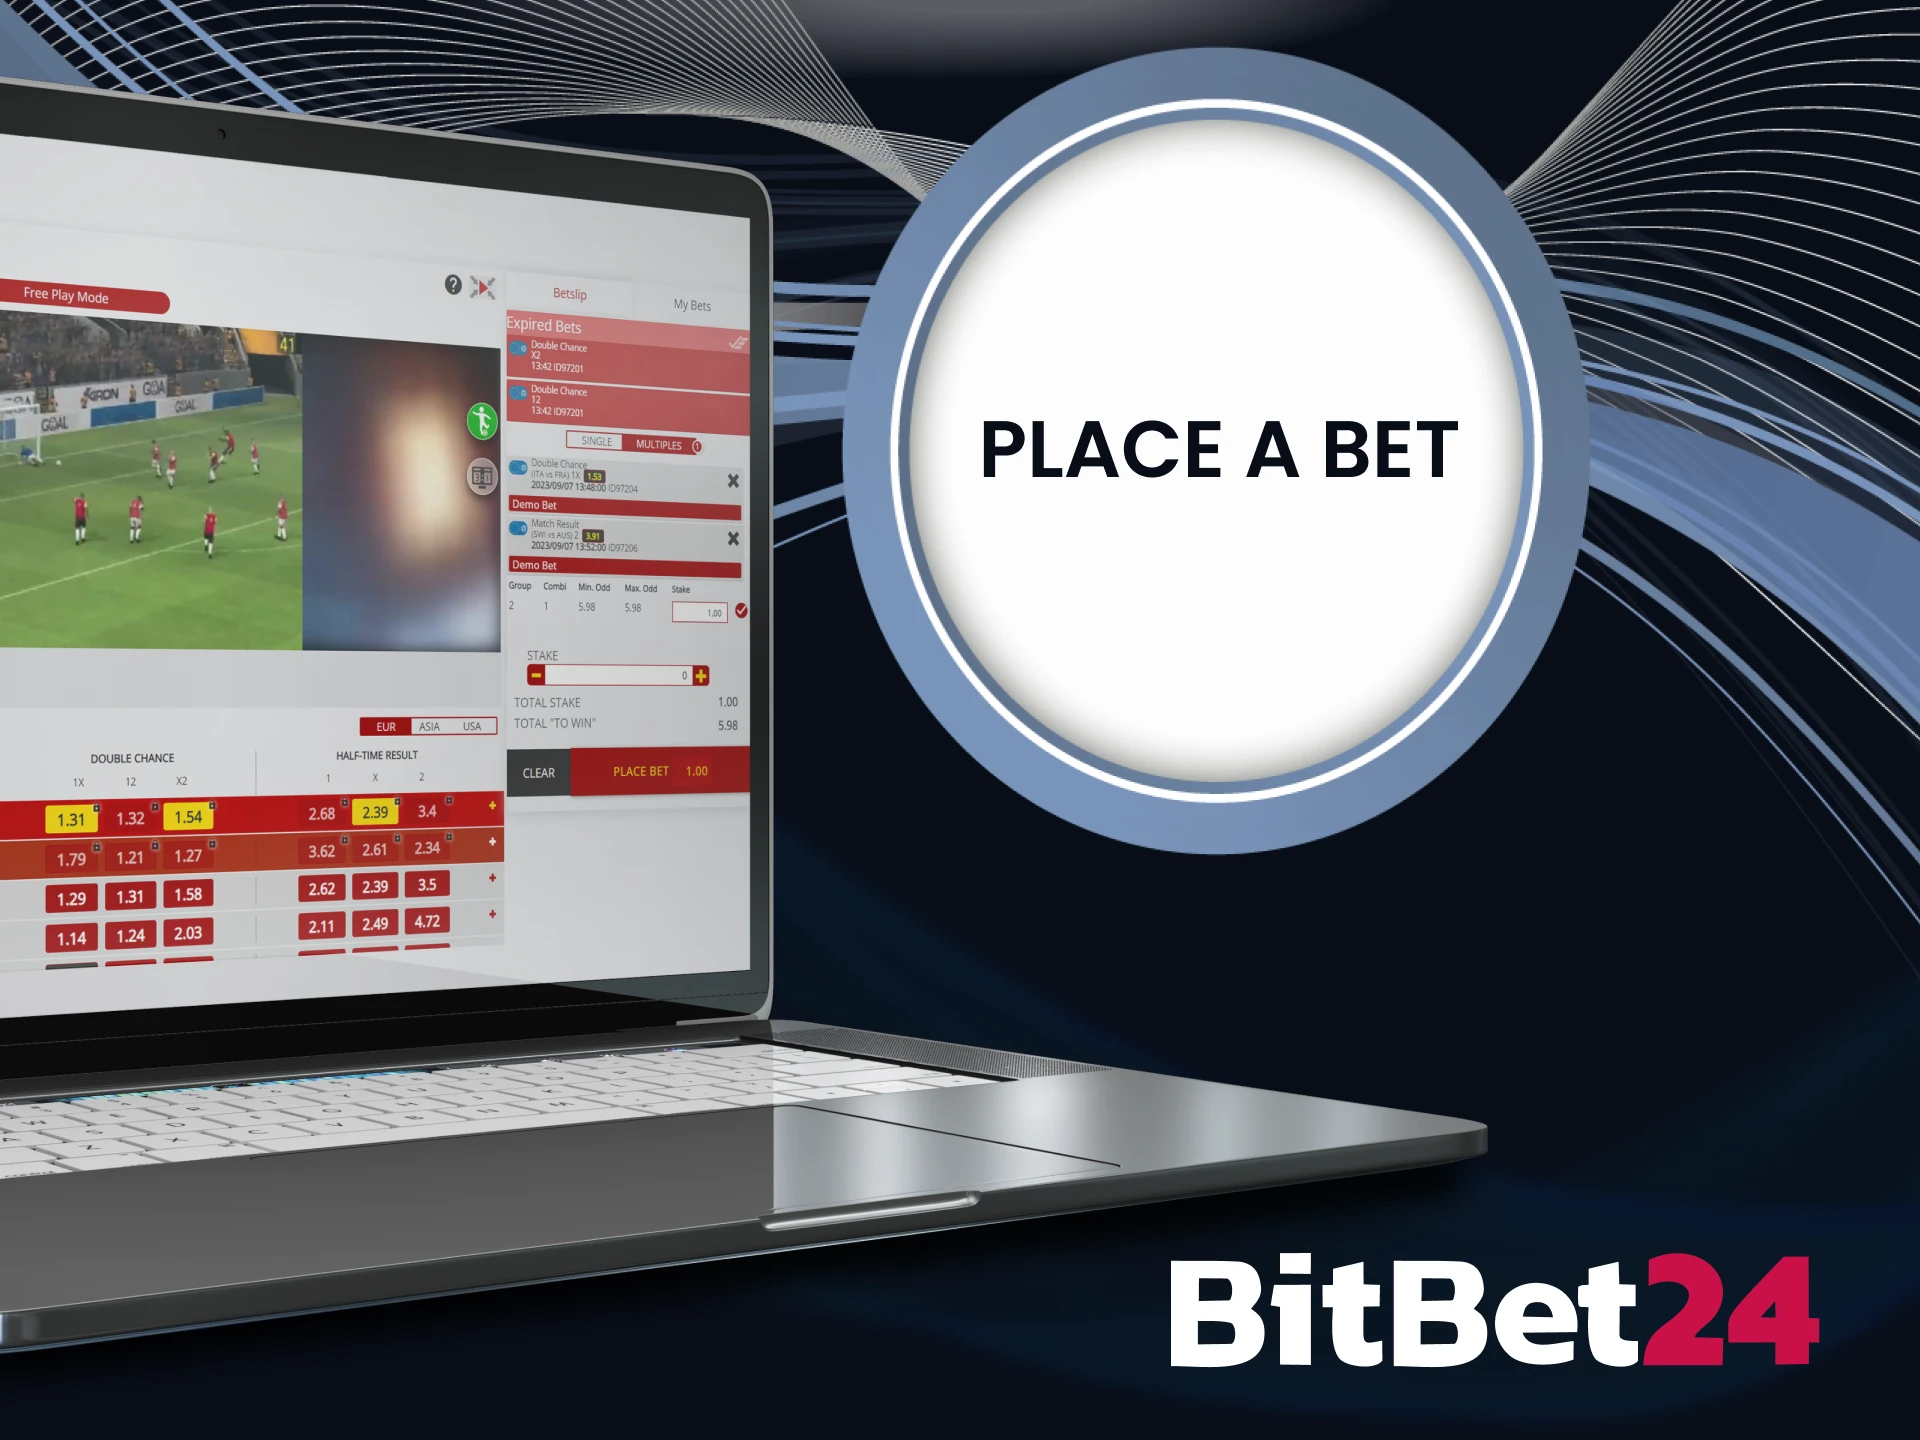 At BitBet24 with these instructions, betting is easy.